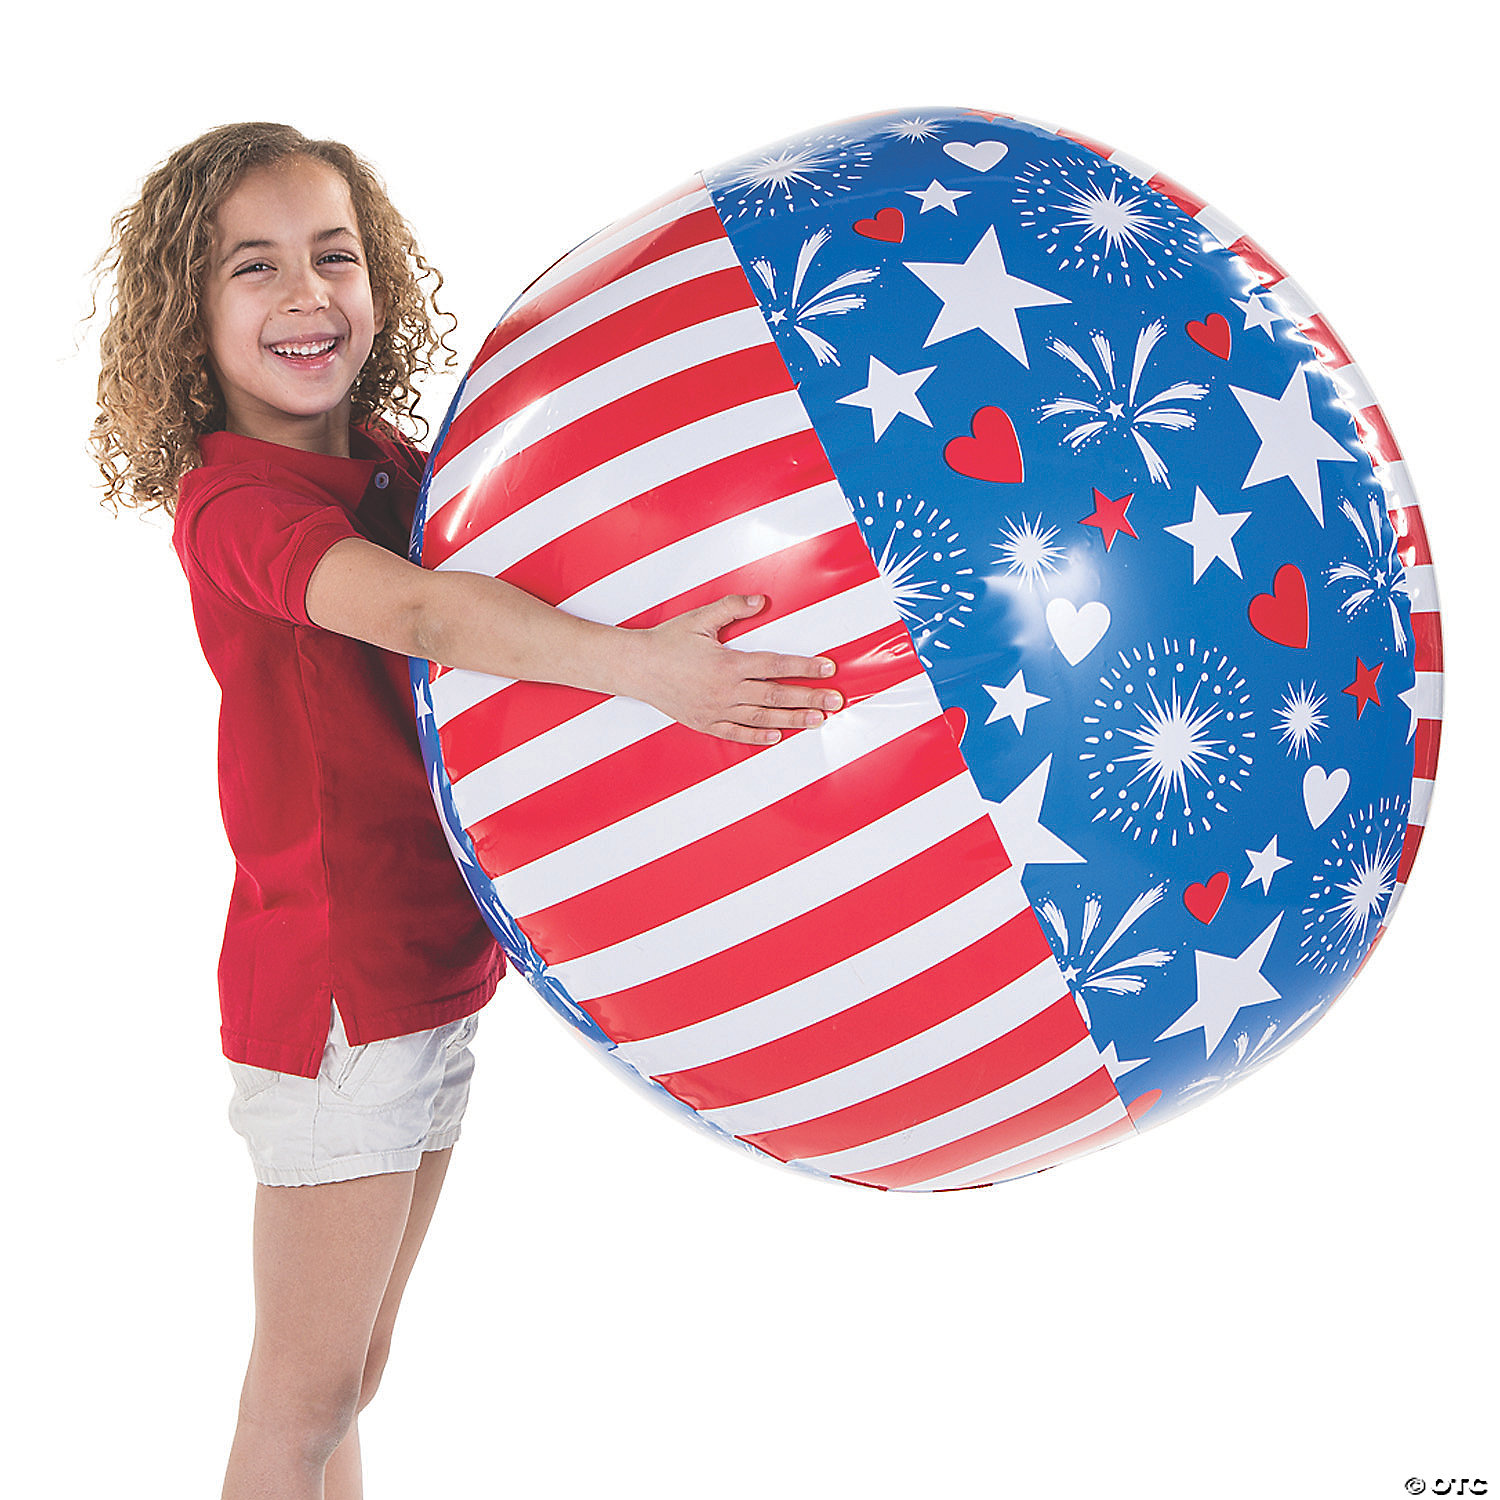 3 Jumbo 48" Inflatable Multi Colored Giant Beach Balls Pool Party Beachball for sale online 